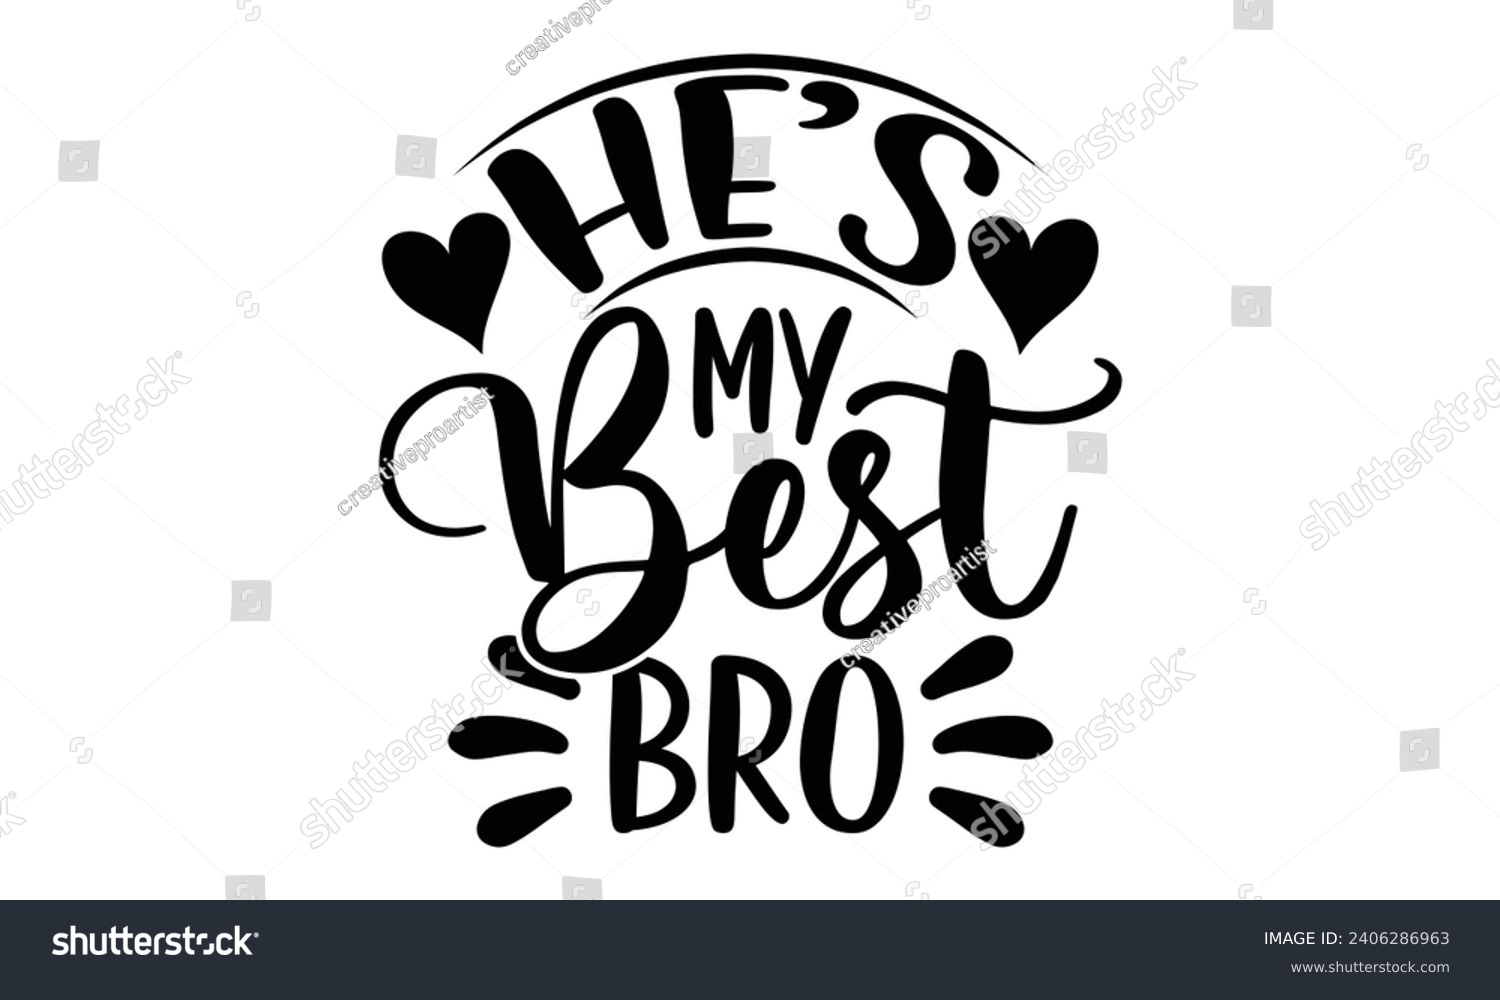 SVG of He’s My Best Bro- Best friends t- shirt design, Hand drawn vintage illustration with hand-lettering and decoration elements, greeting card template with typography text svg